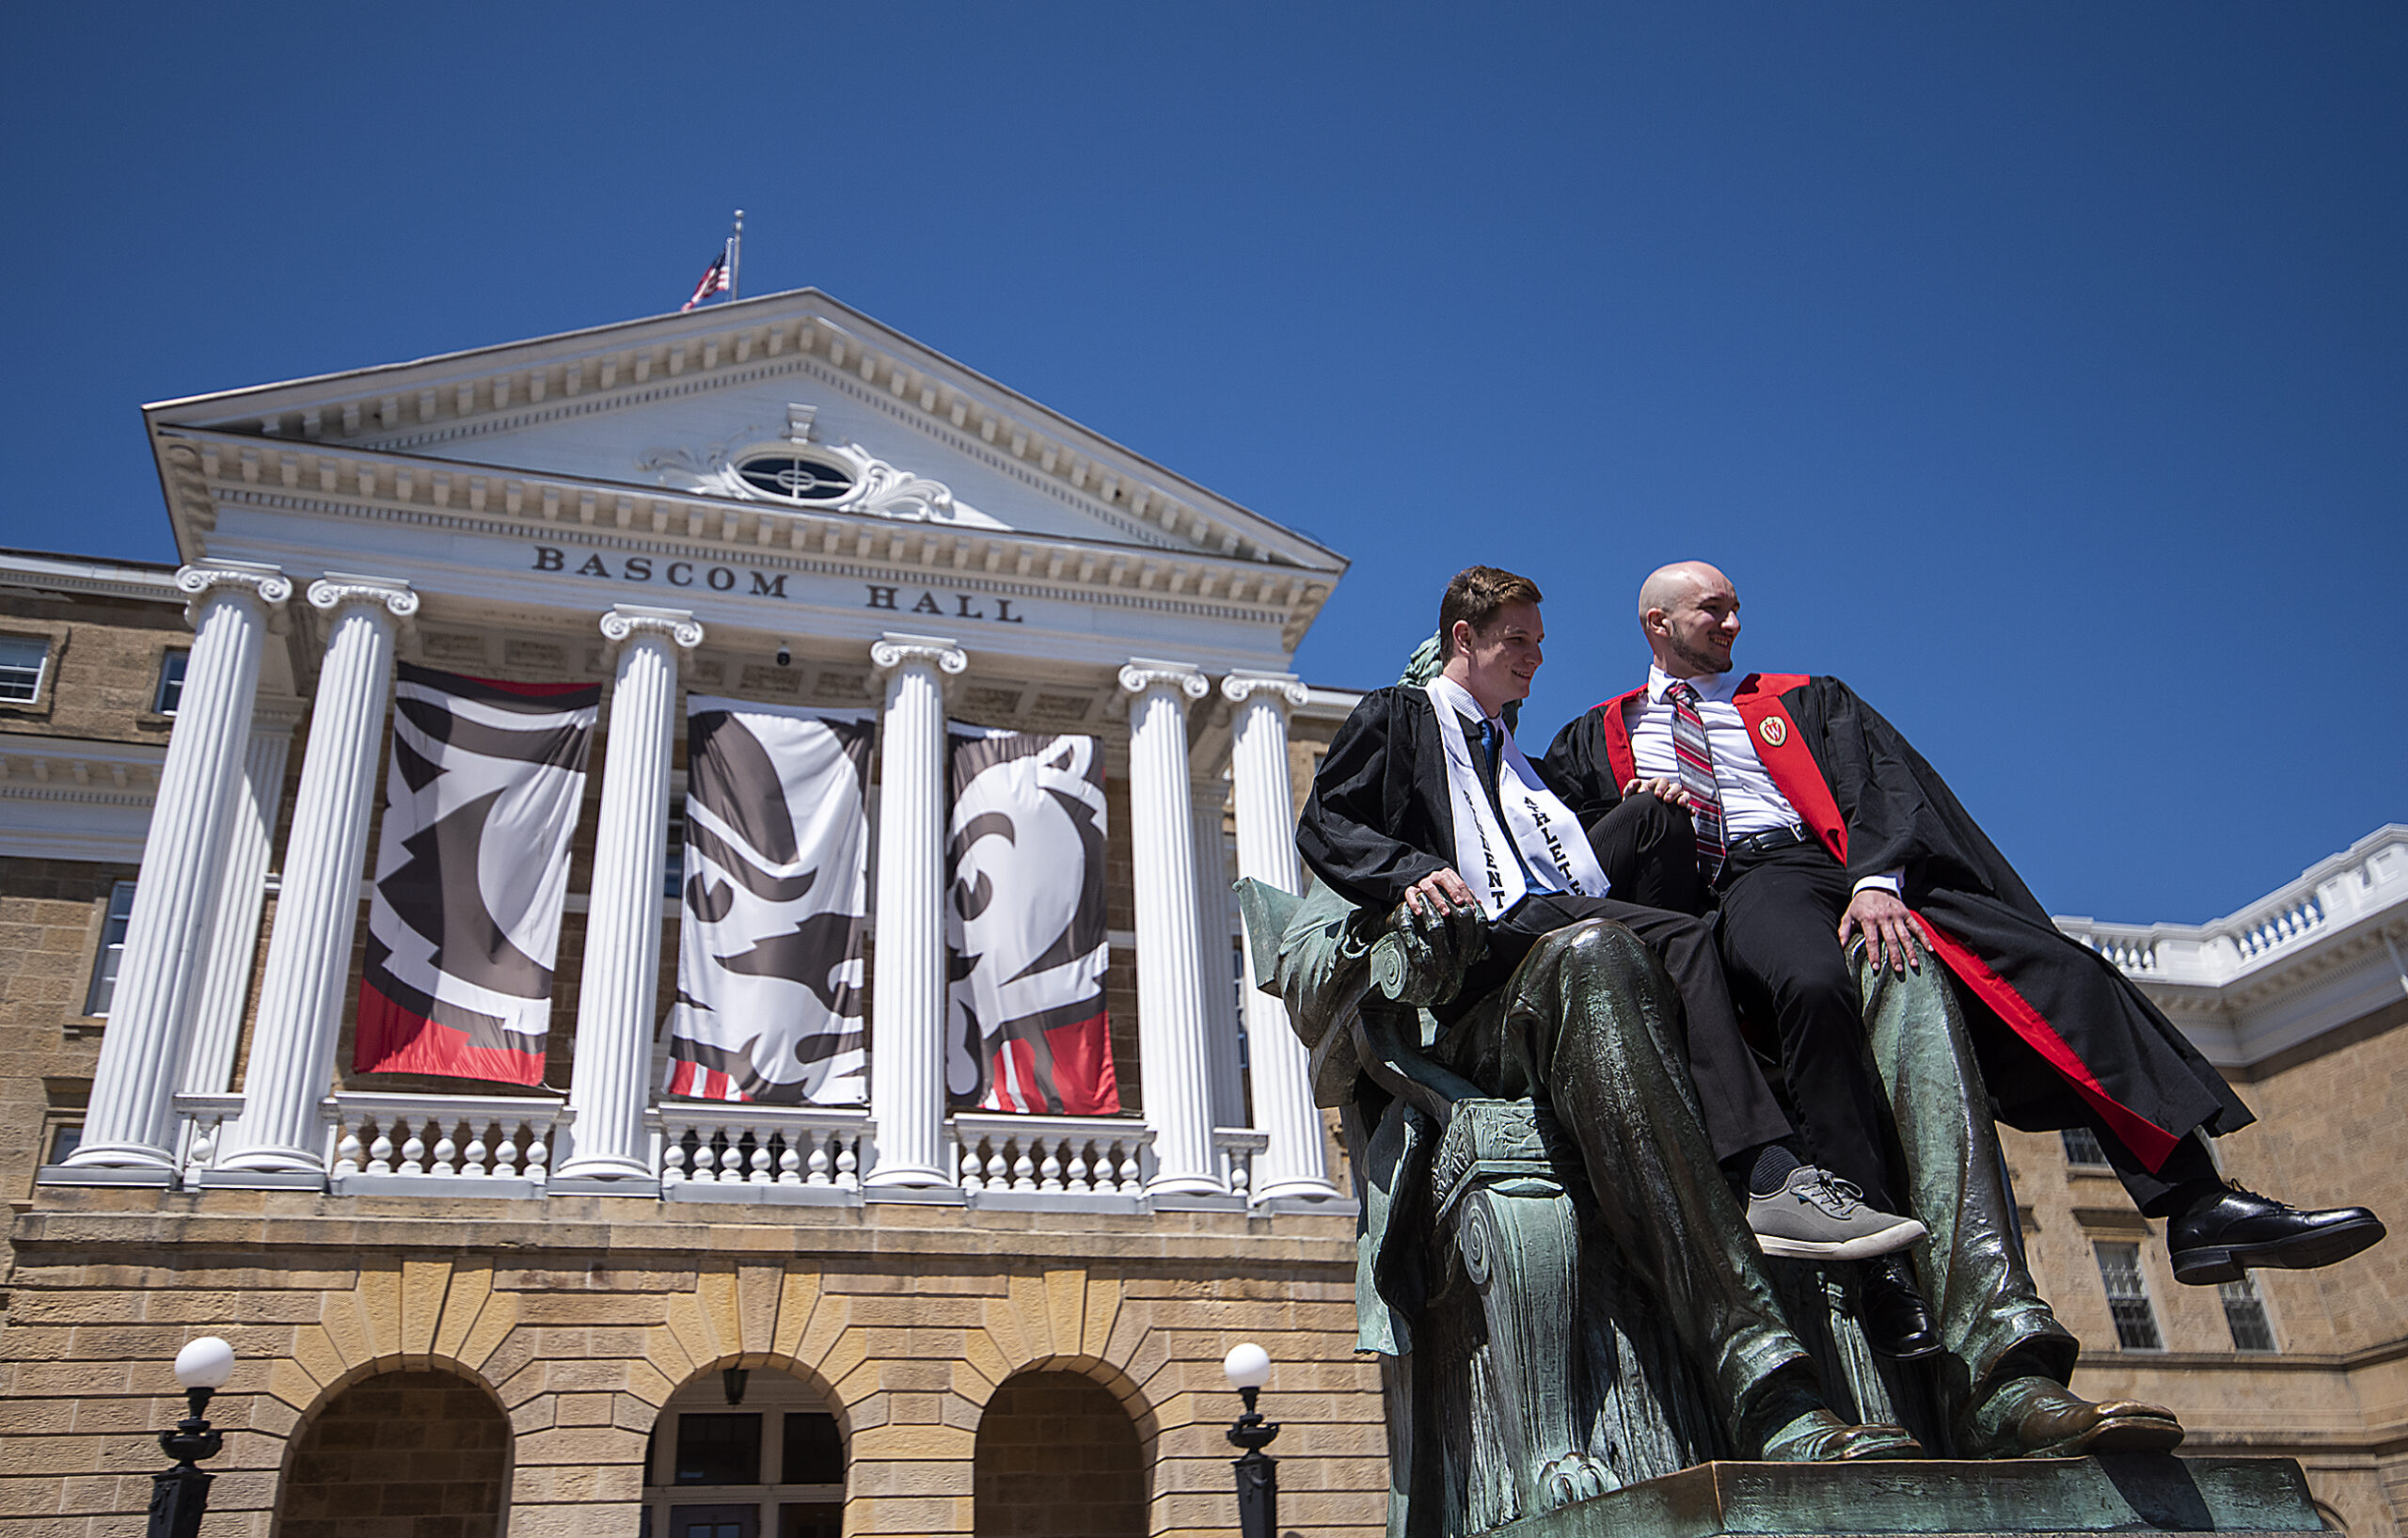 Two graduates in caps and gowns sit on the Abraham Lincoln statue at Bascom Hill at UW-Madison to take photos.